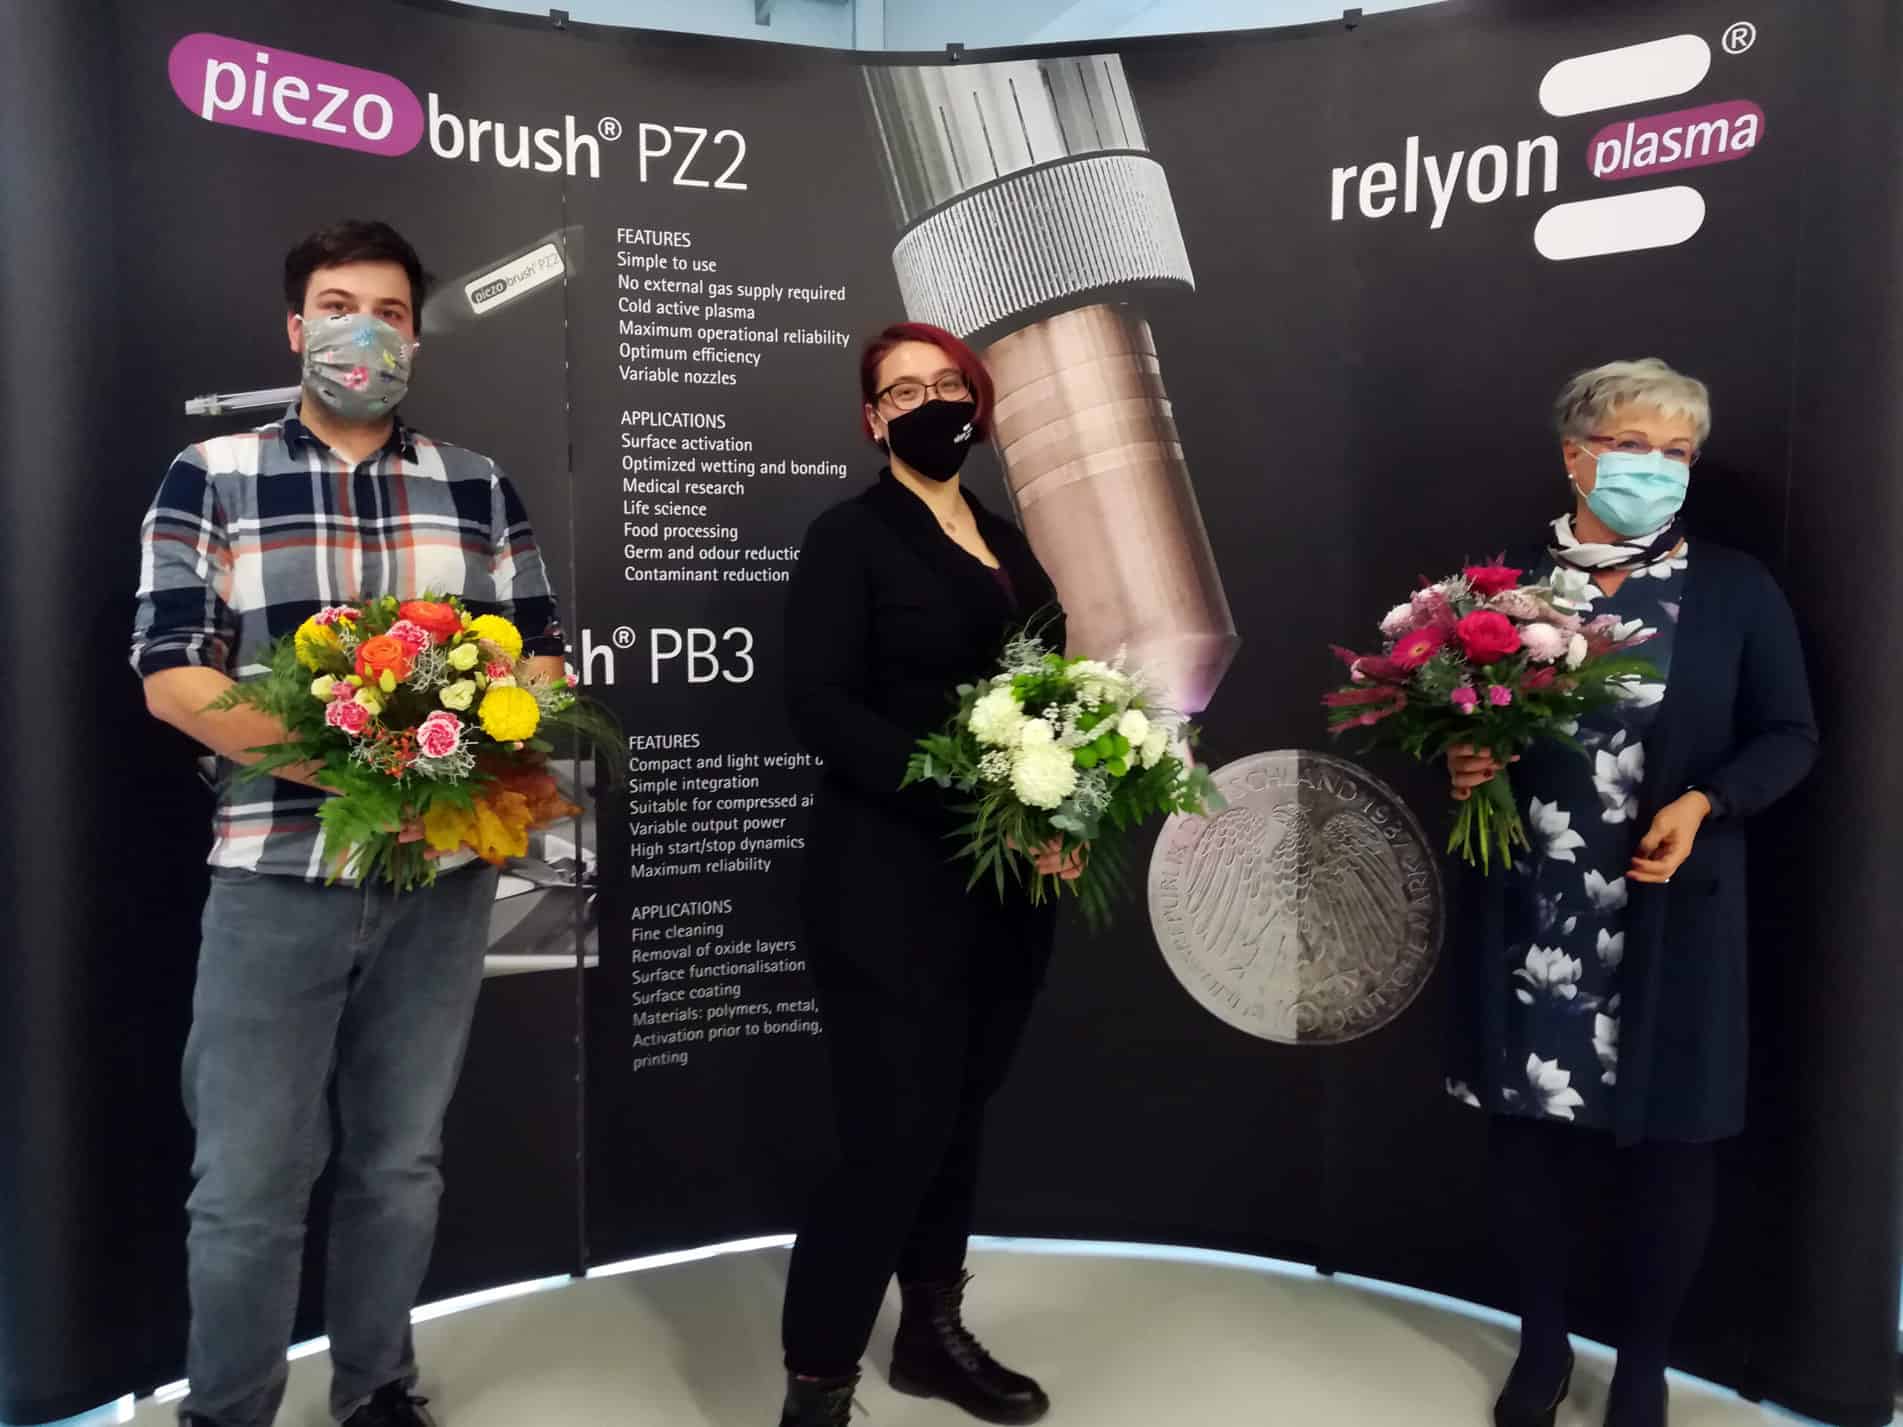 Quality management team relyon plasma (from left to right): Andreas Ammon , Katharina Bayer, Geri Rich-ter after certification DIN ISO EN 13485